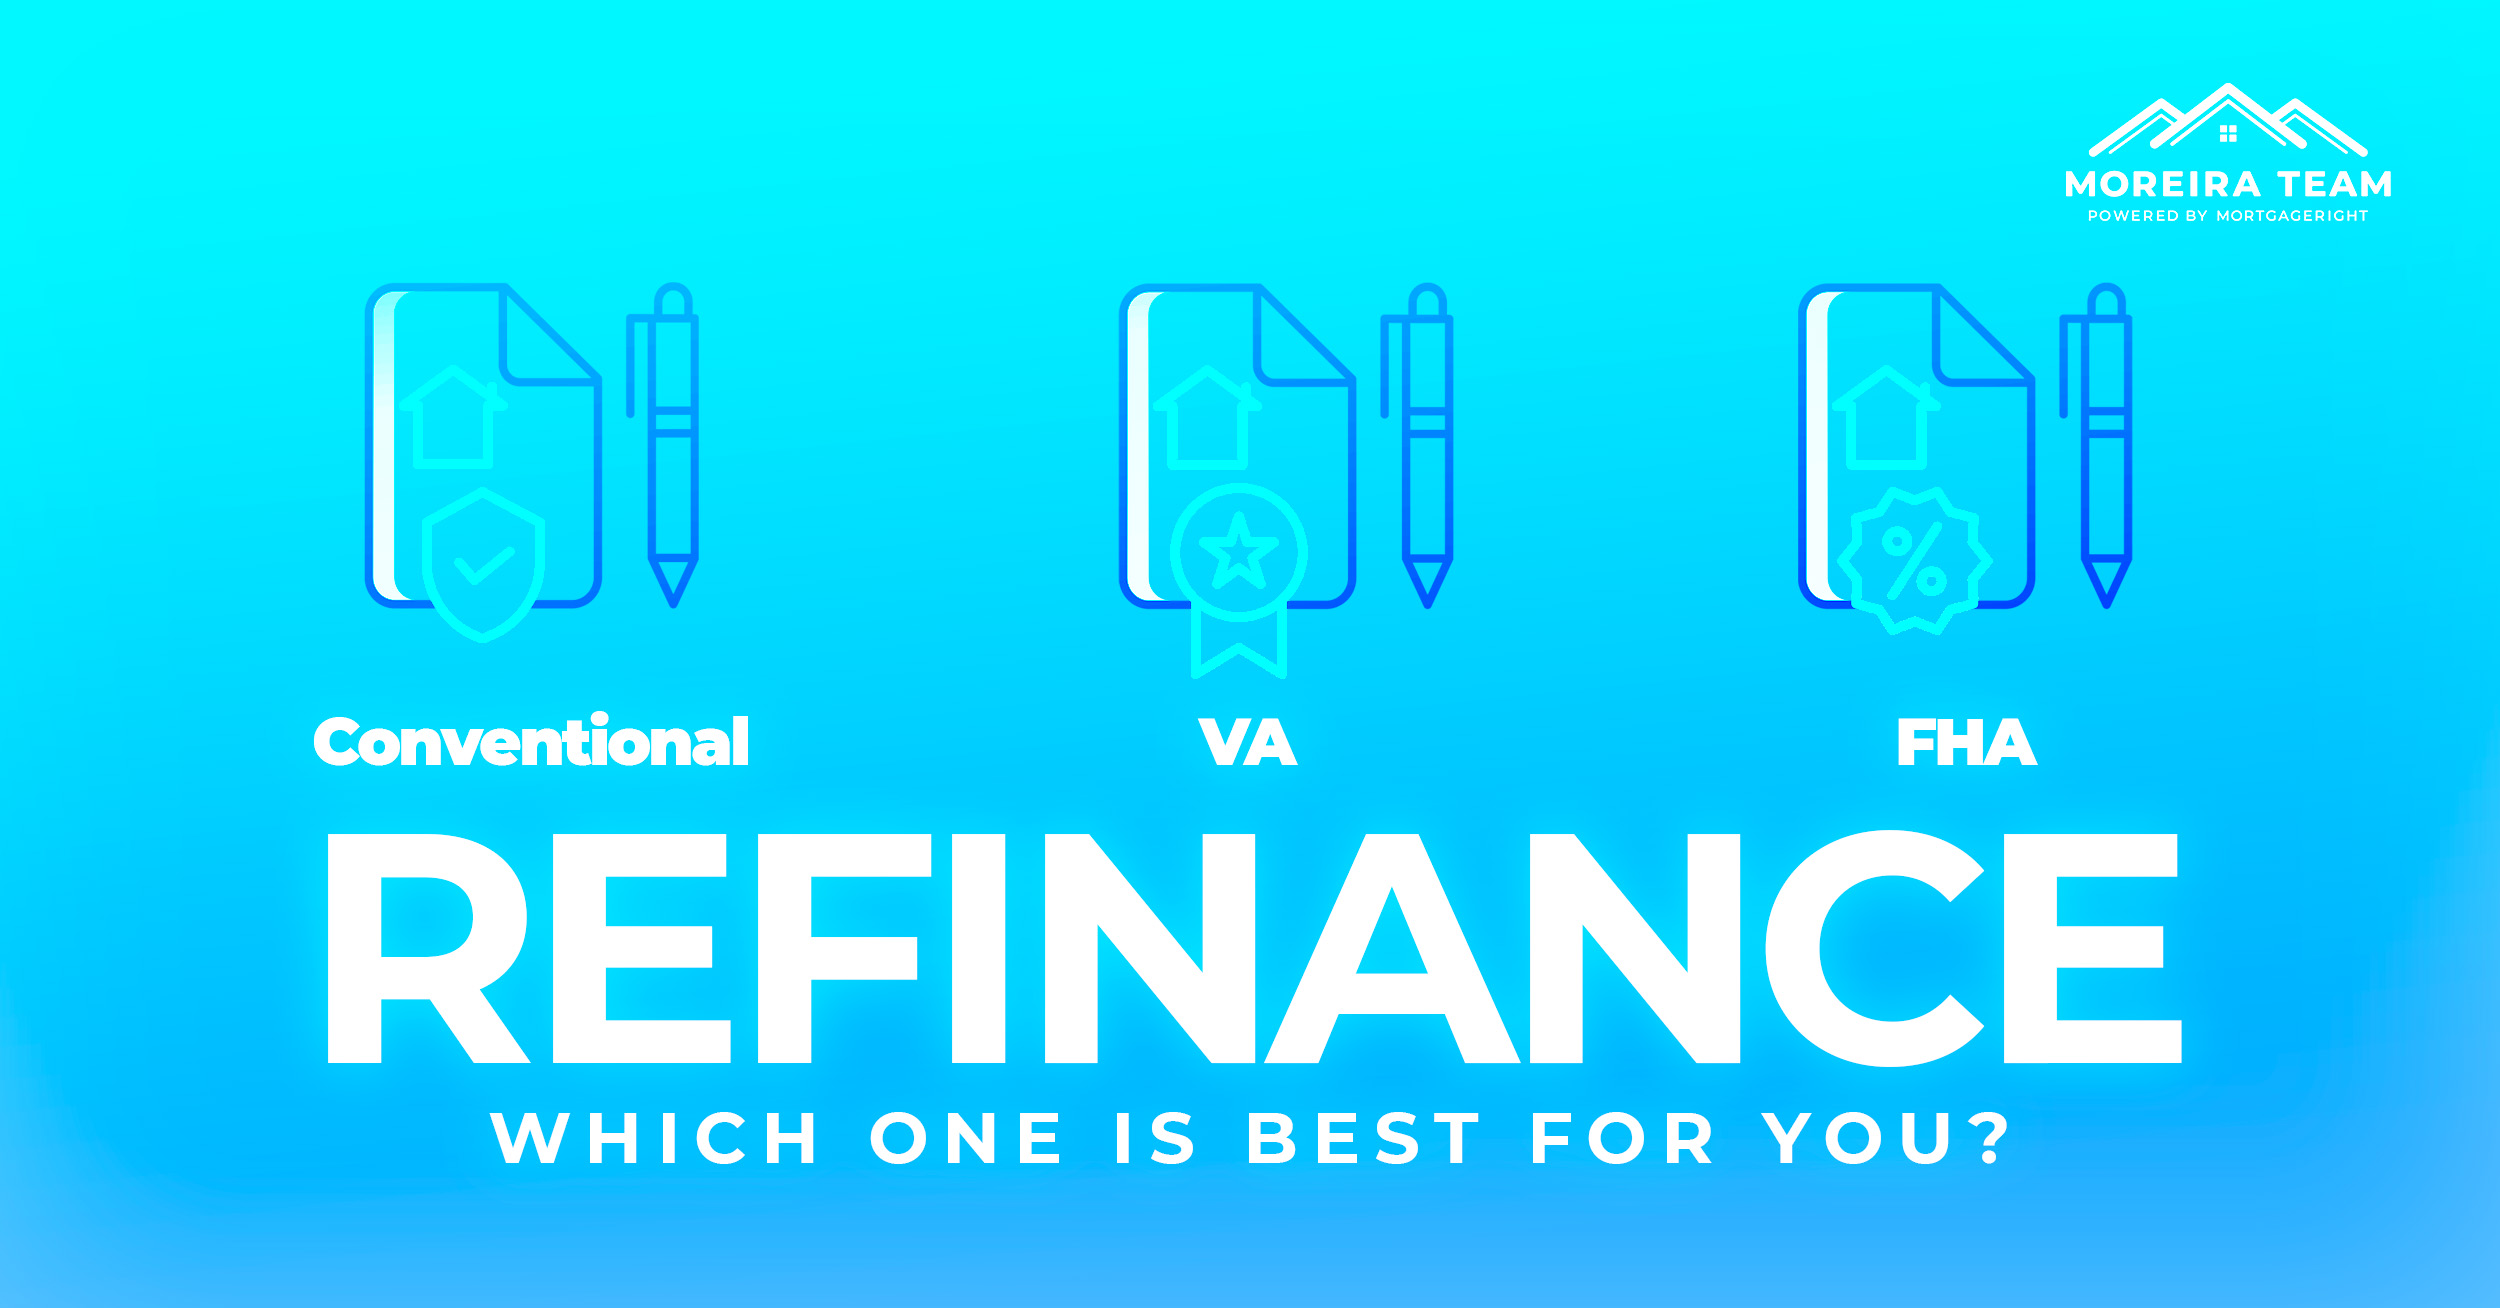 What refinance program is best for you